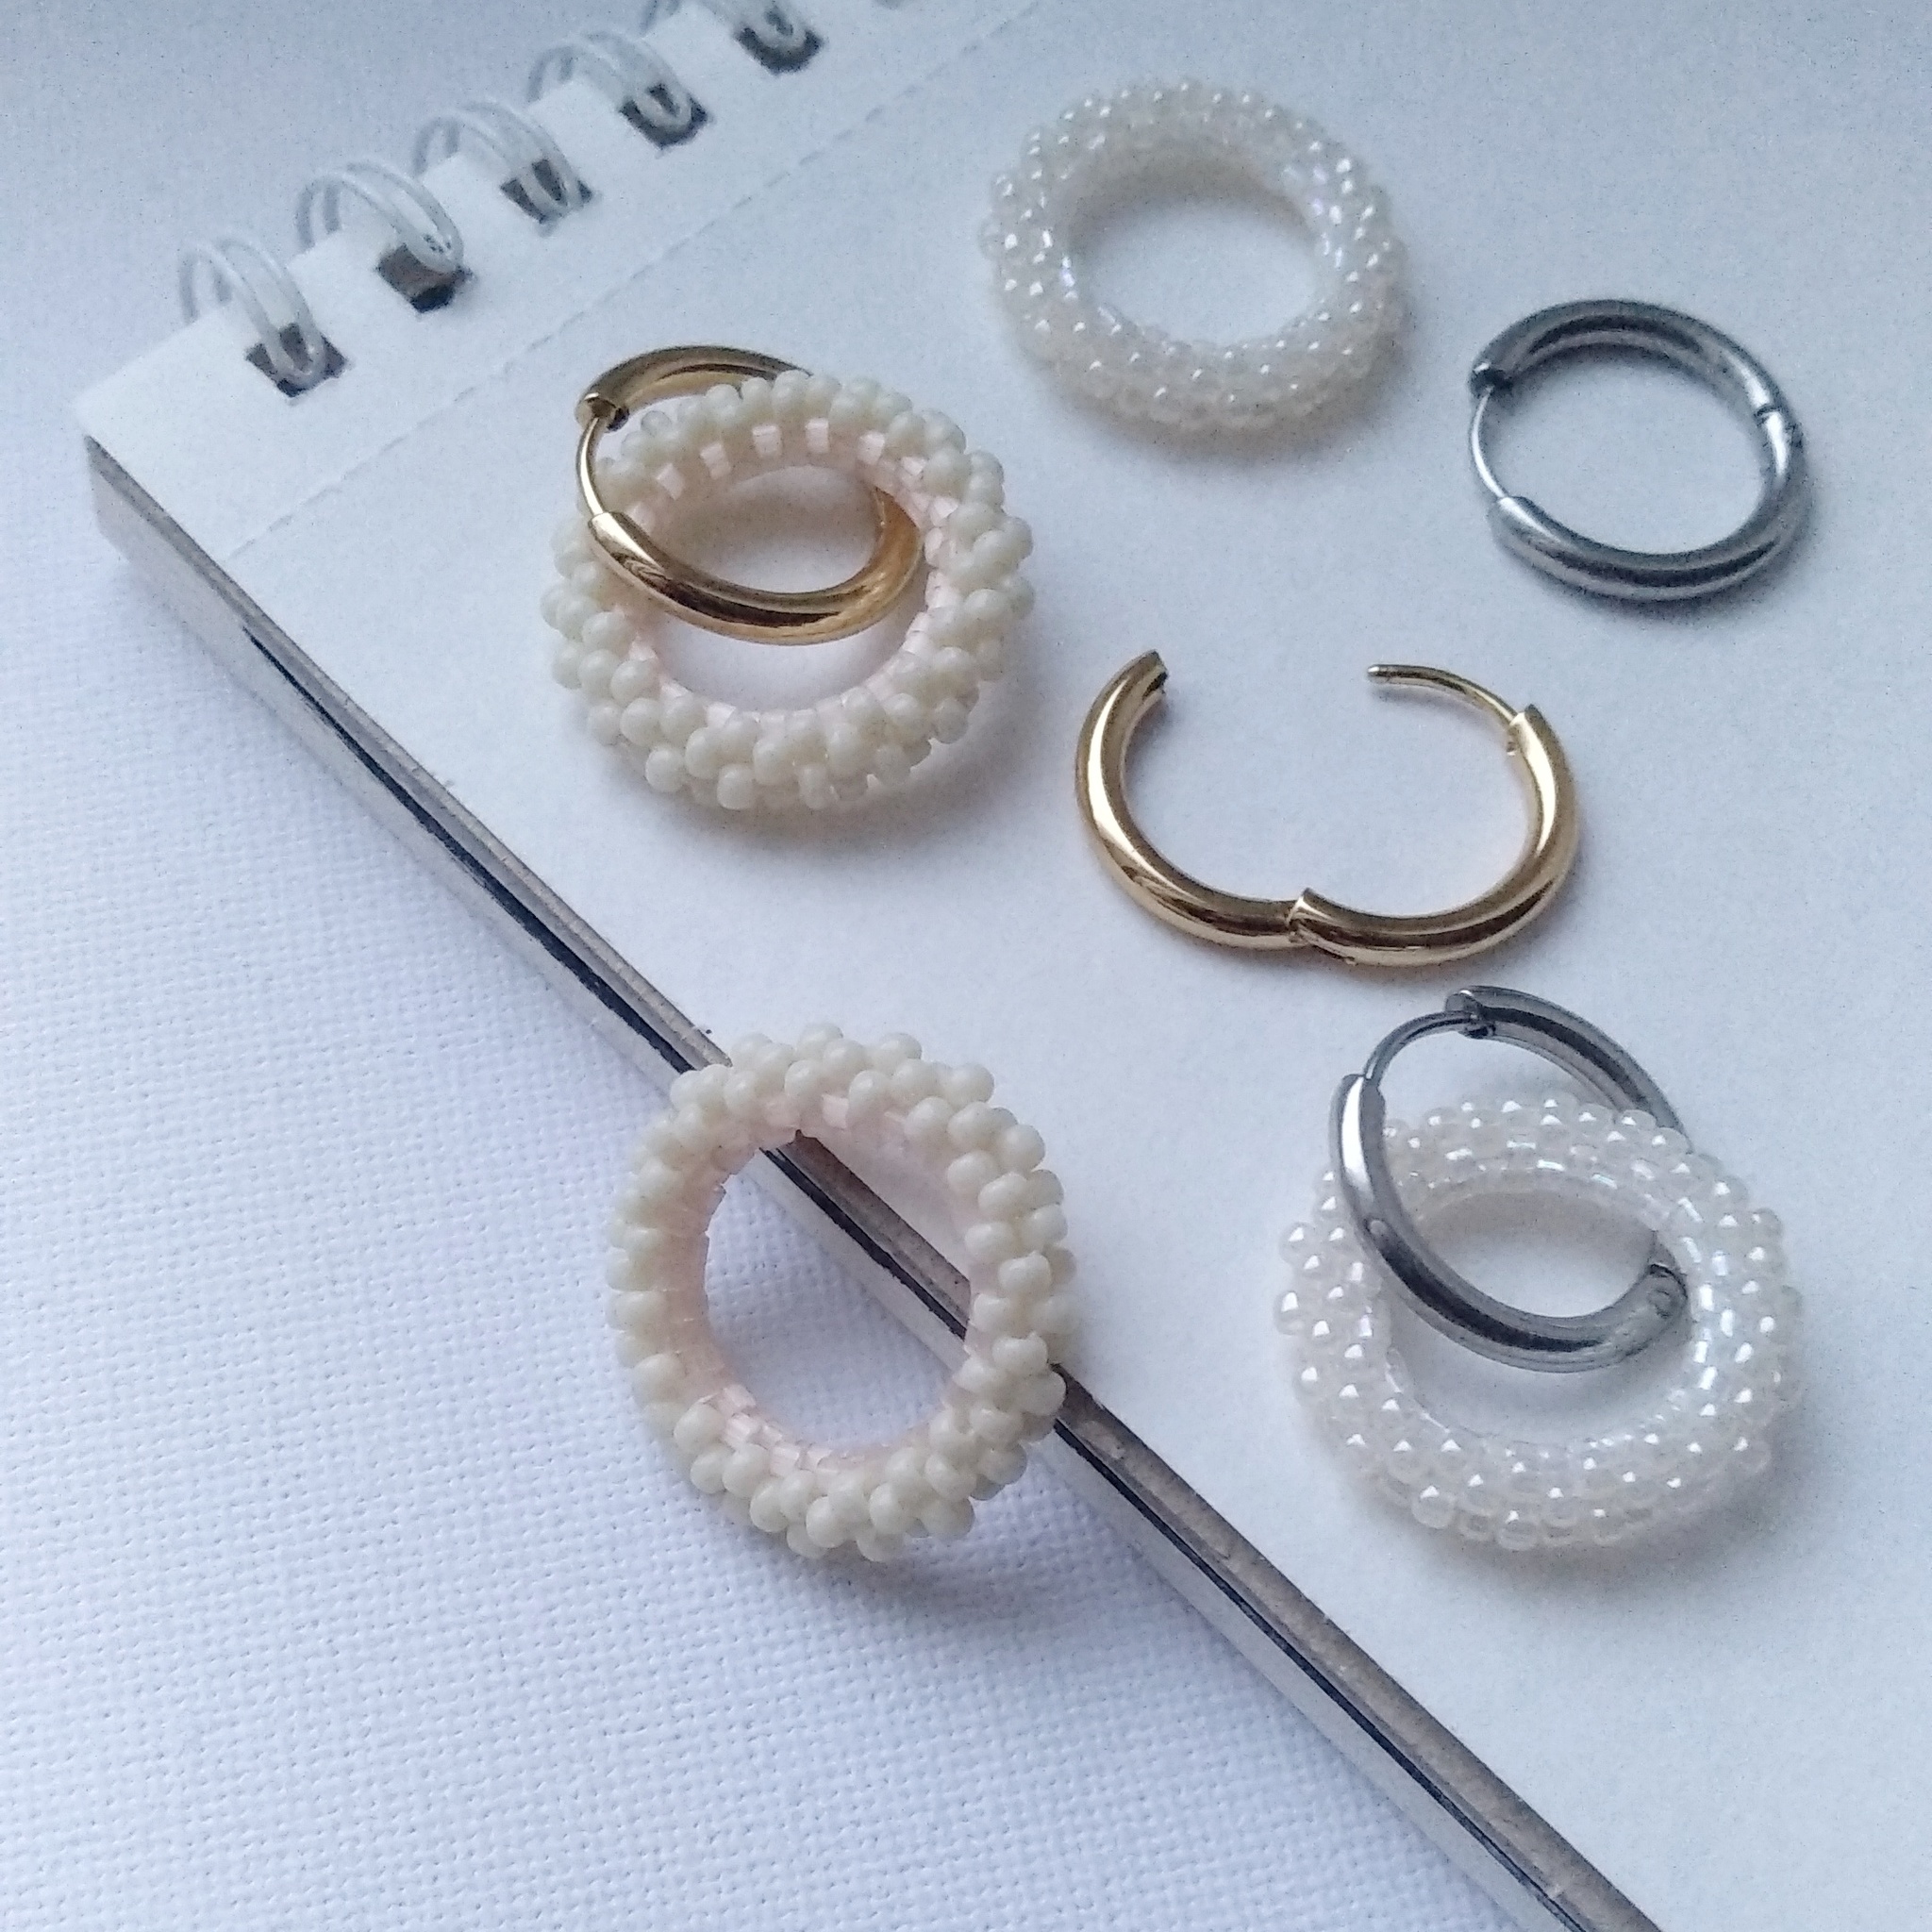 How I wove perfectly smooth ringlets - Longpost, Master, author, Bijouterie, Decoration, Girls, Moscow, The photo, Mobile photography, Creation, Hobby, Beads, Needlework, Earrings, My